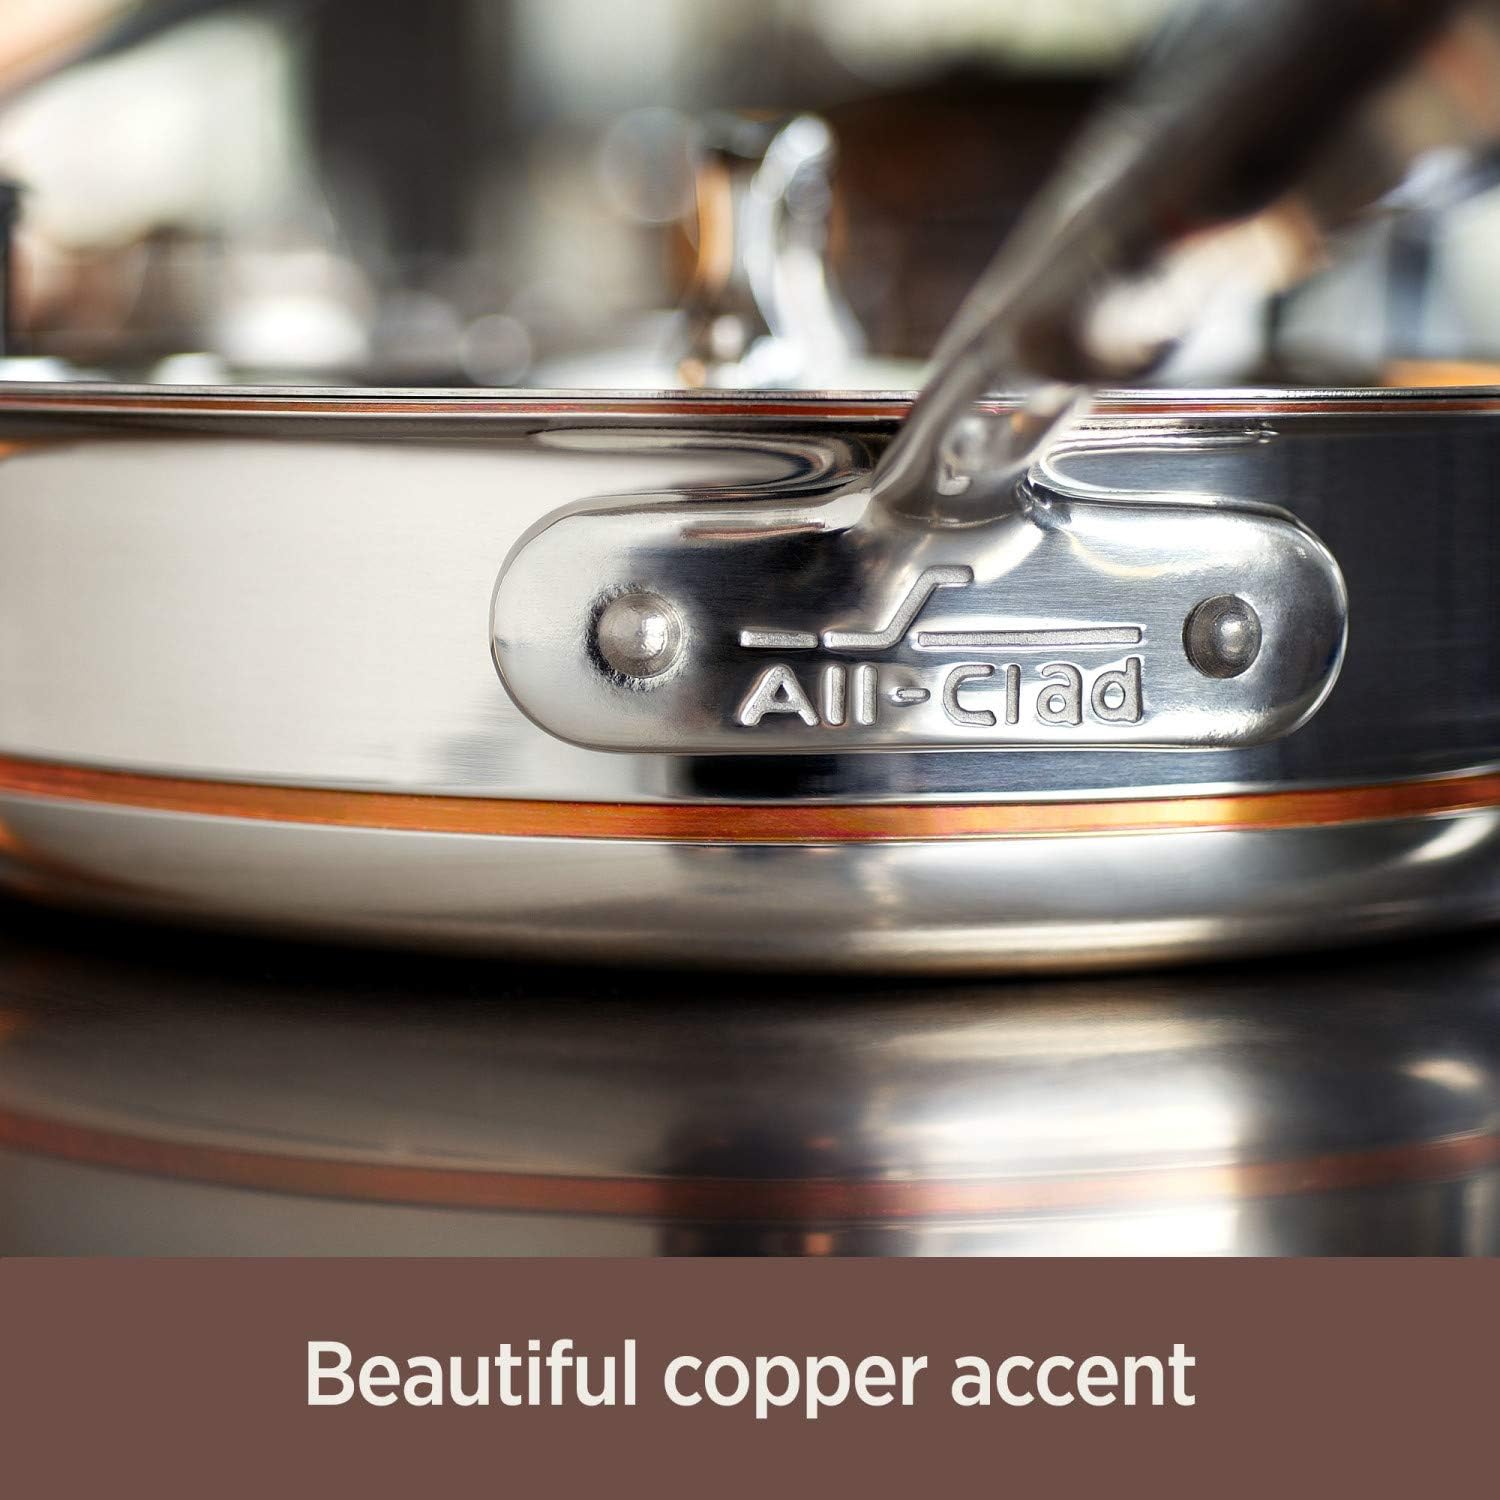 https://bigbigmart.com/wp-content/uploads/2023/09/All-Clad-Copper-Core-5-Ply-Stainless-Steel-Saute-Pan-with-Steel-Lid-5-Quart-Induction-Oven-Broil-Safe-600F-Pots-and-Pans-Cookware6.jpg